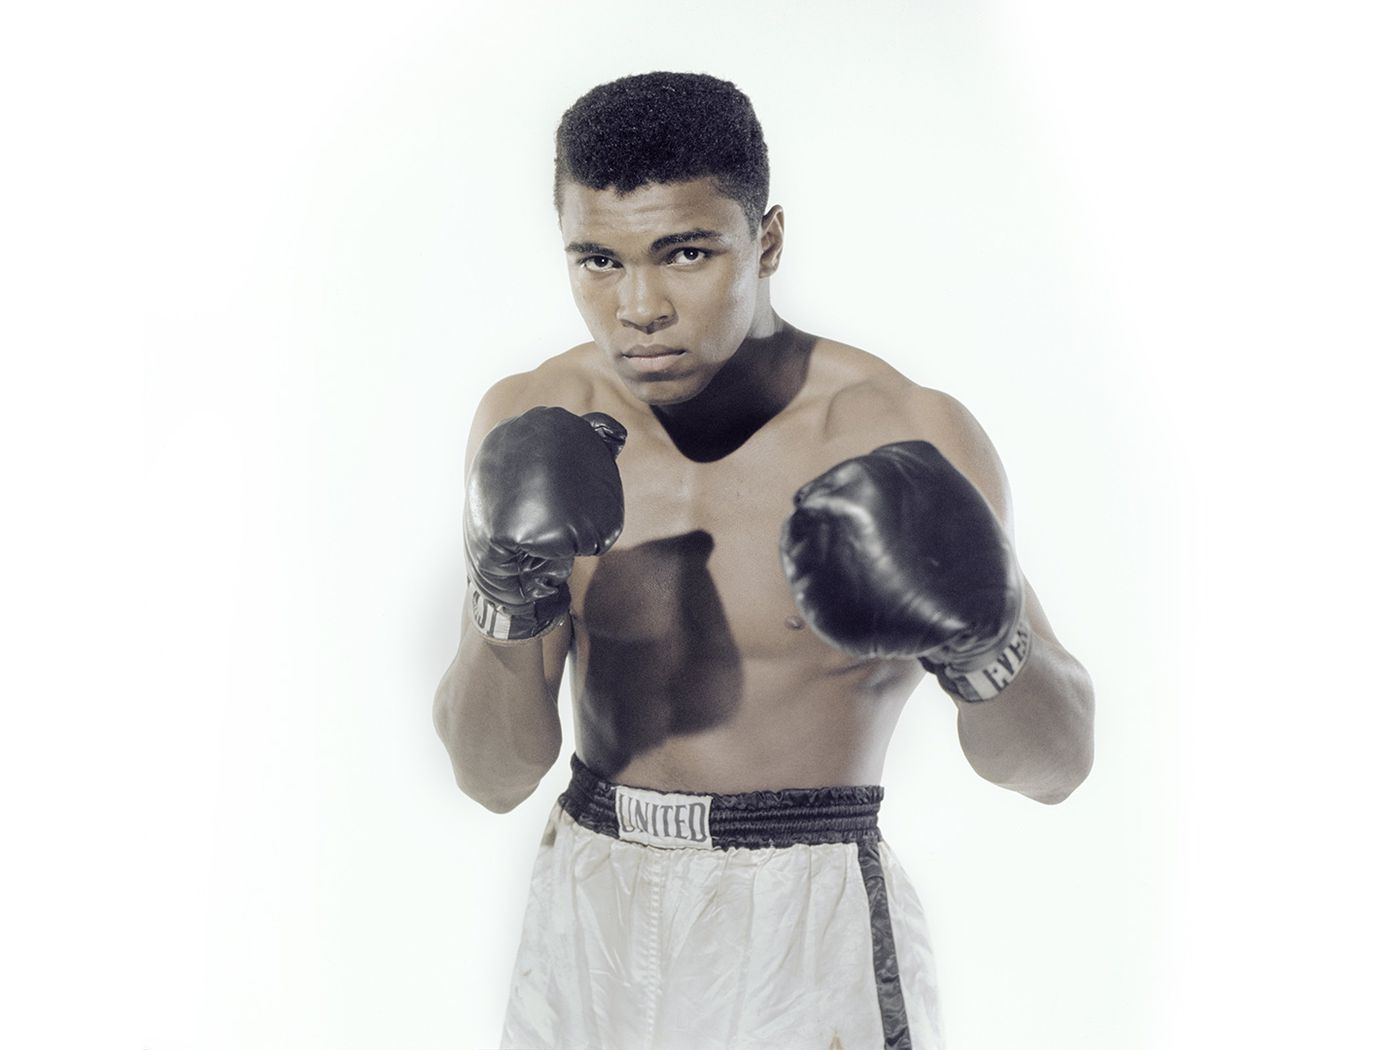 What was the nickname given to Muhammad Ali by his fans?